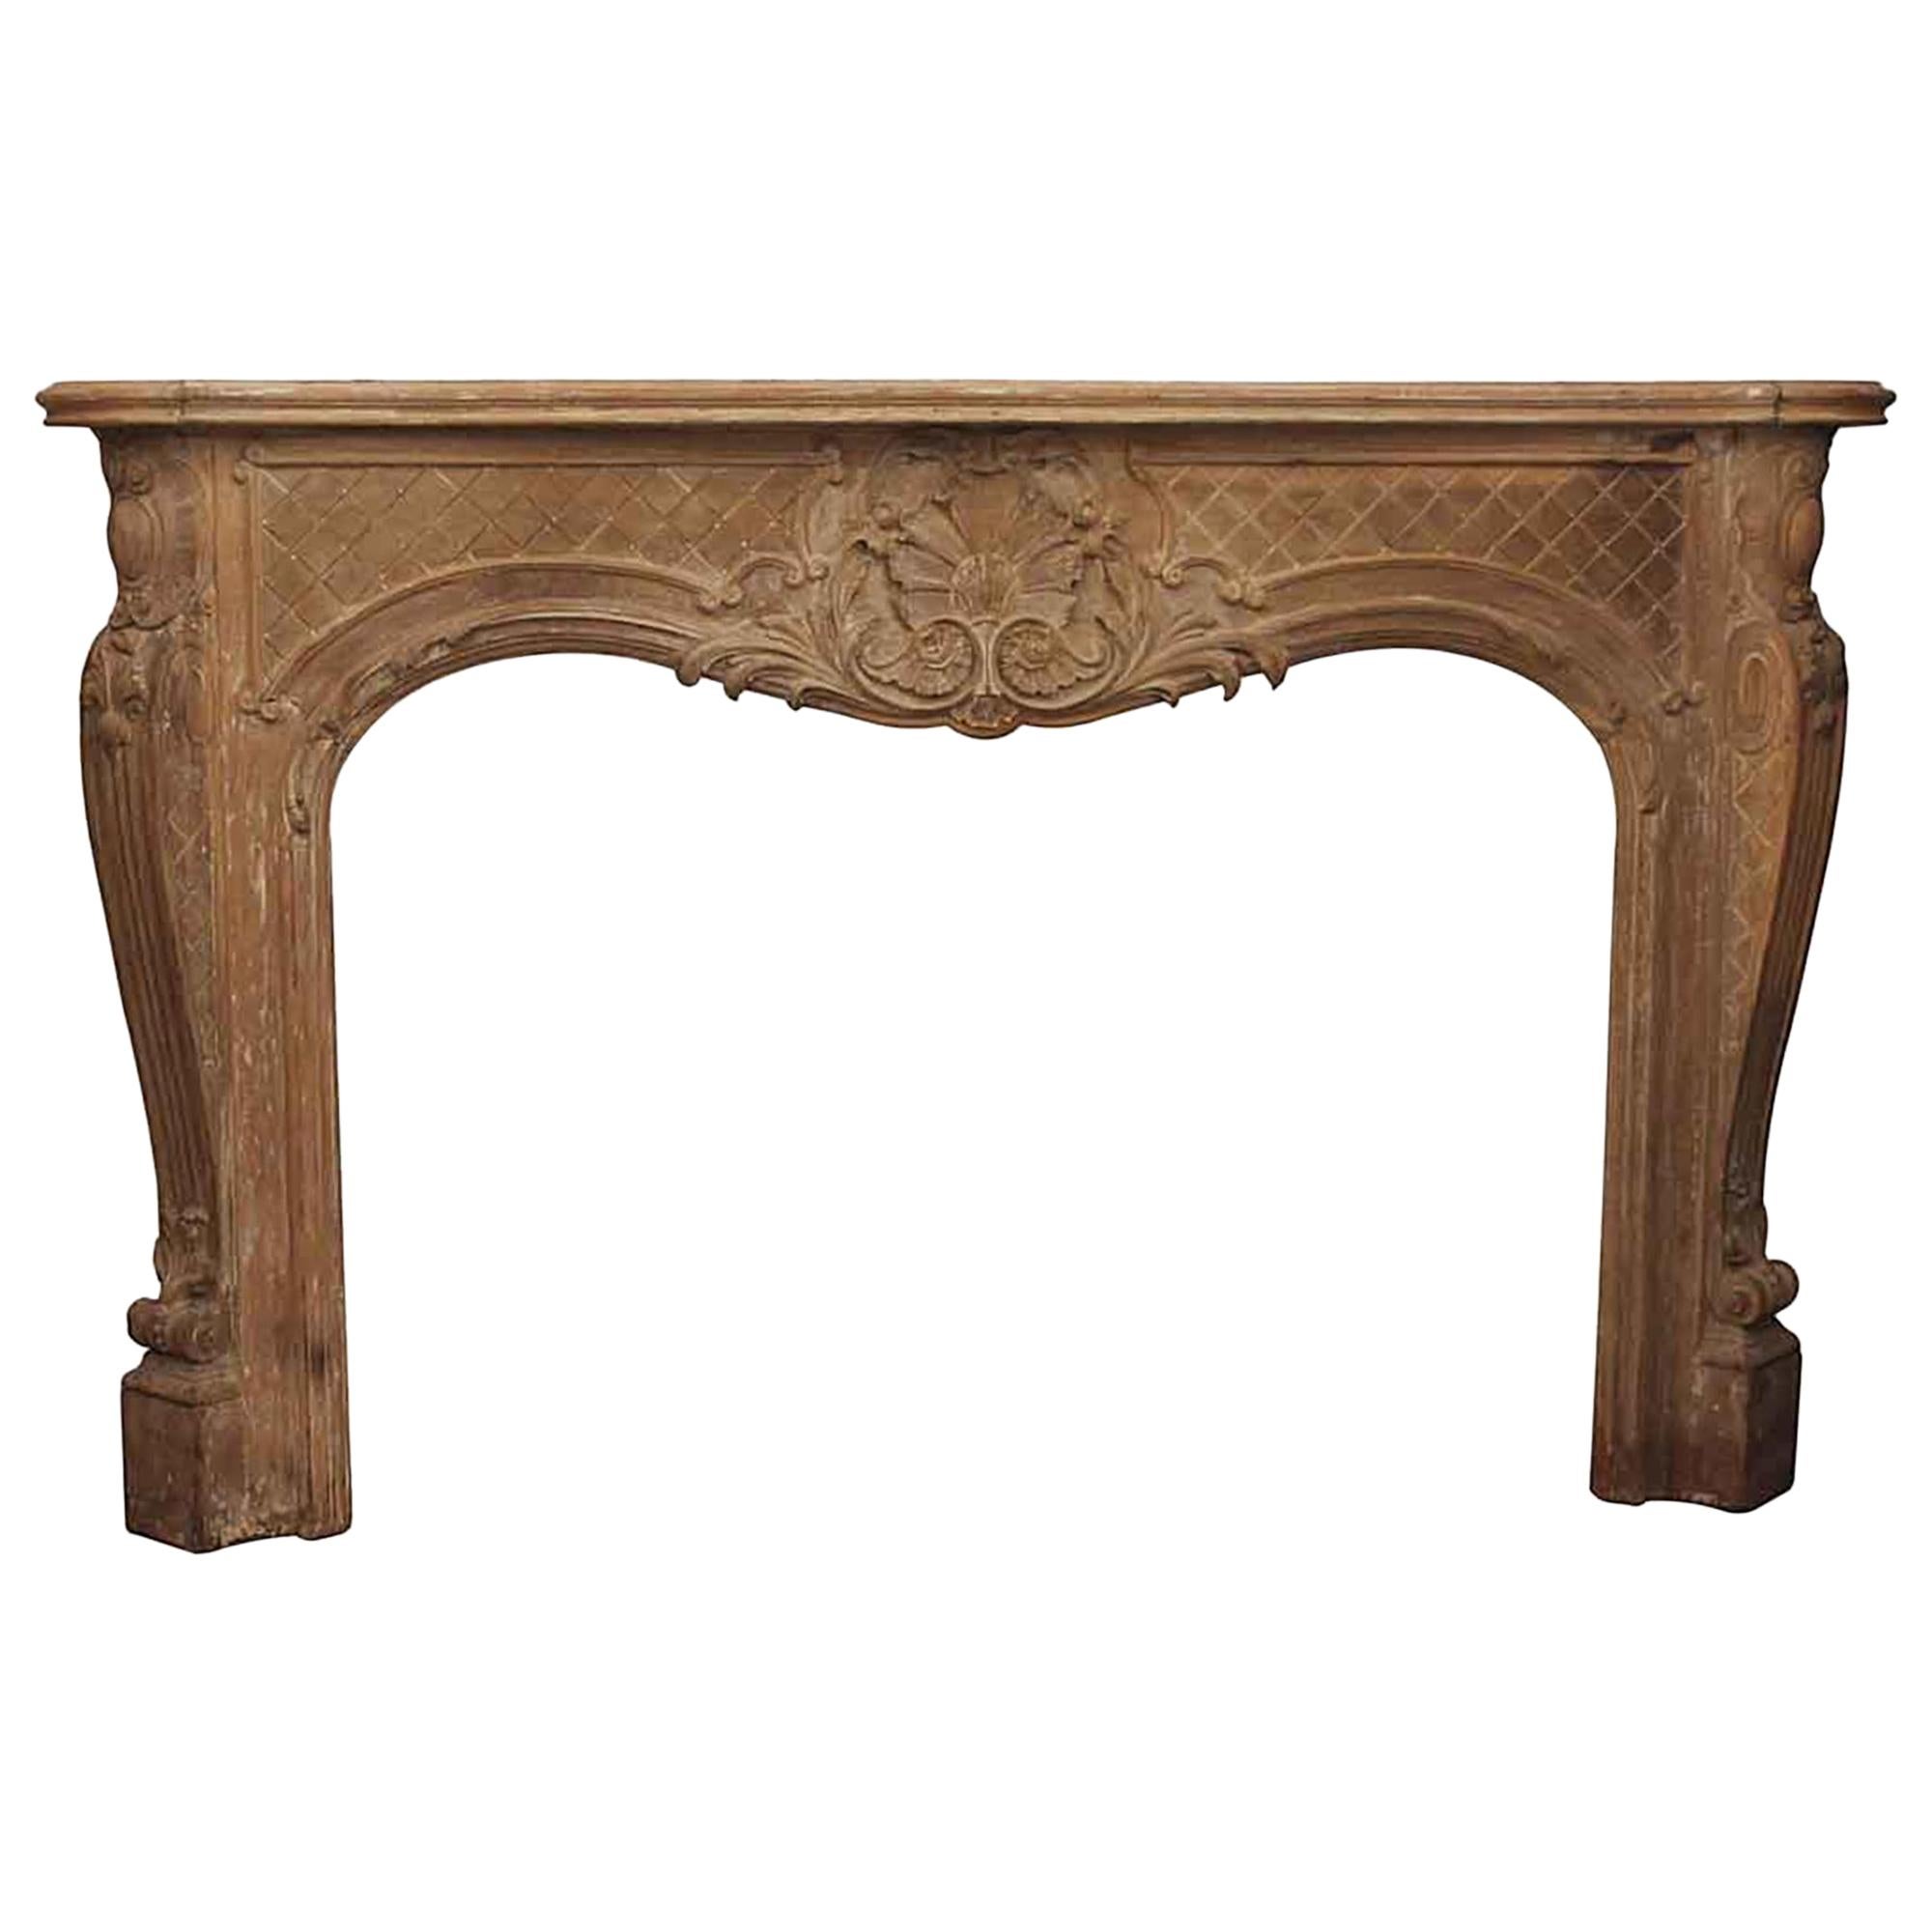 19th Century French Lous XV Carved Wooden Mantel